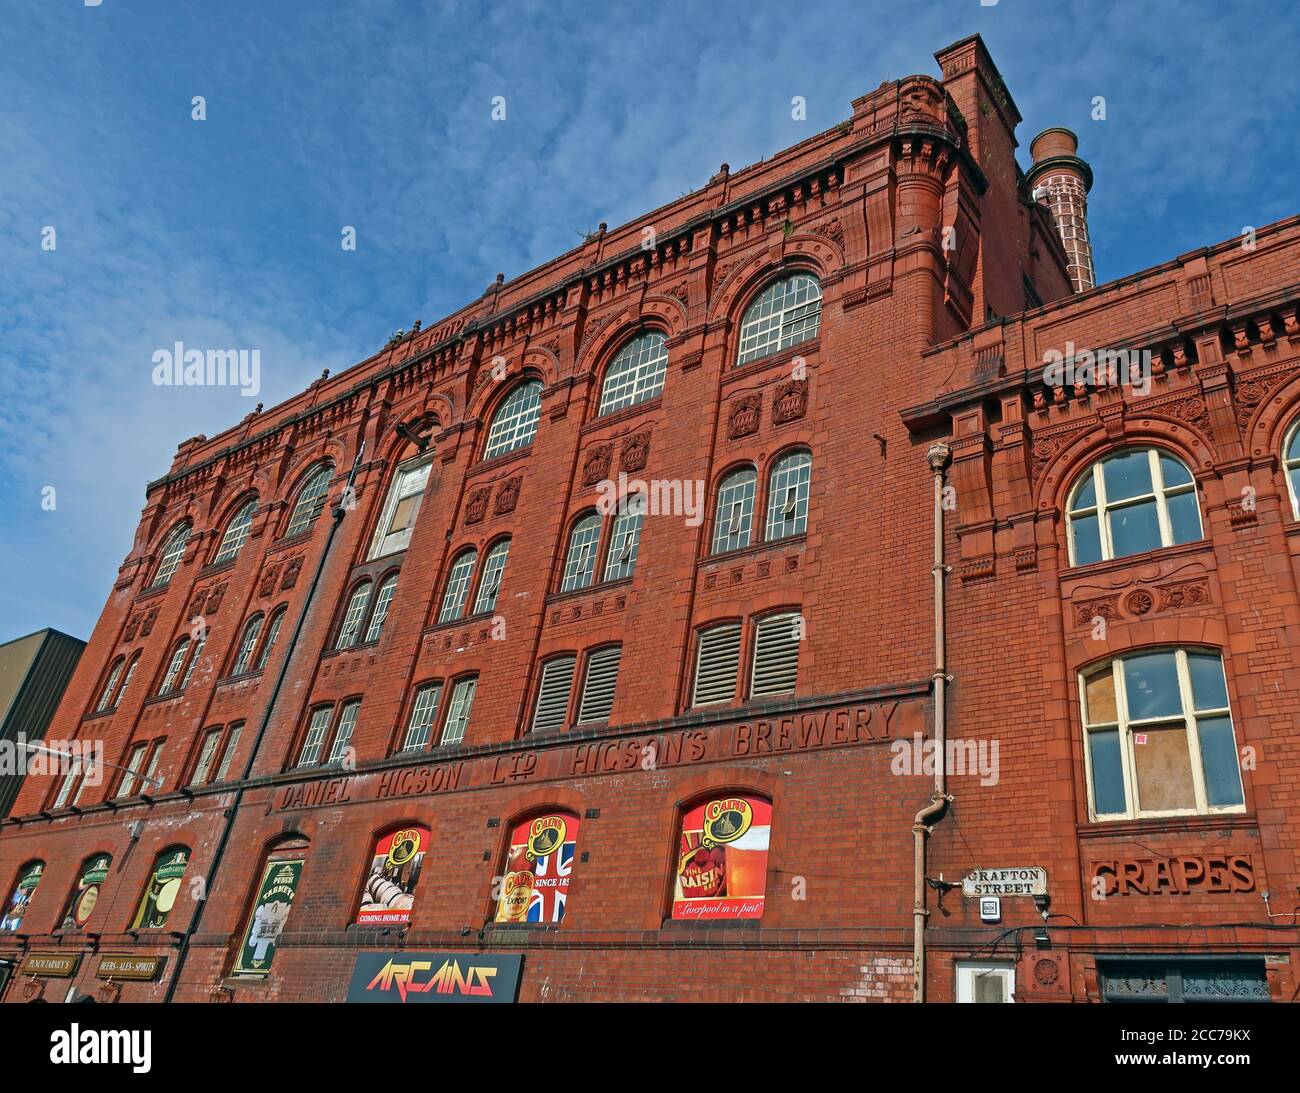 Higsons,Cains brewery, 39 Stanhope St, Liverpool, Merseyside, England, UK,  L8 5RE Stock Photo